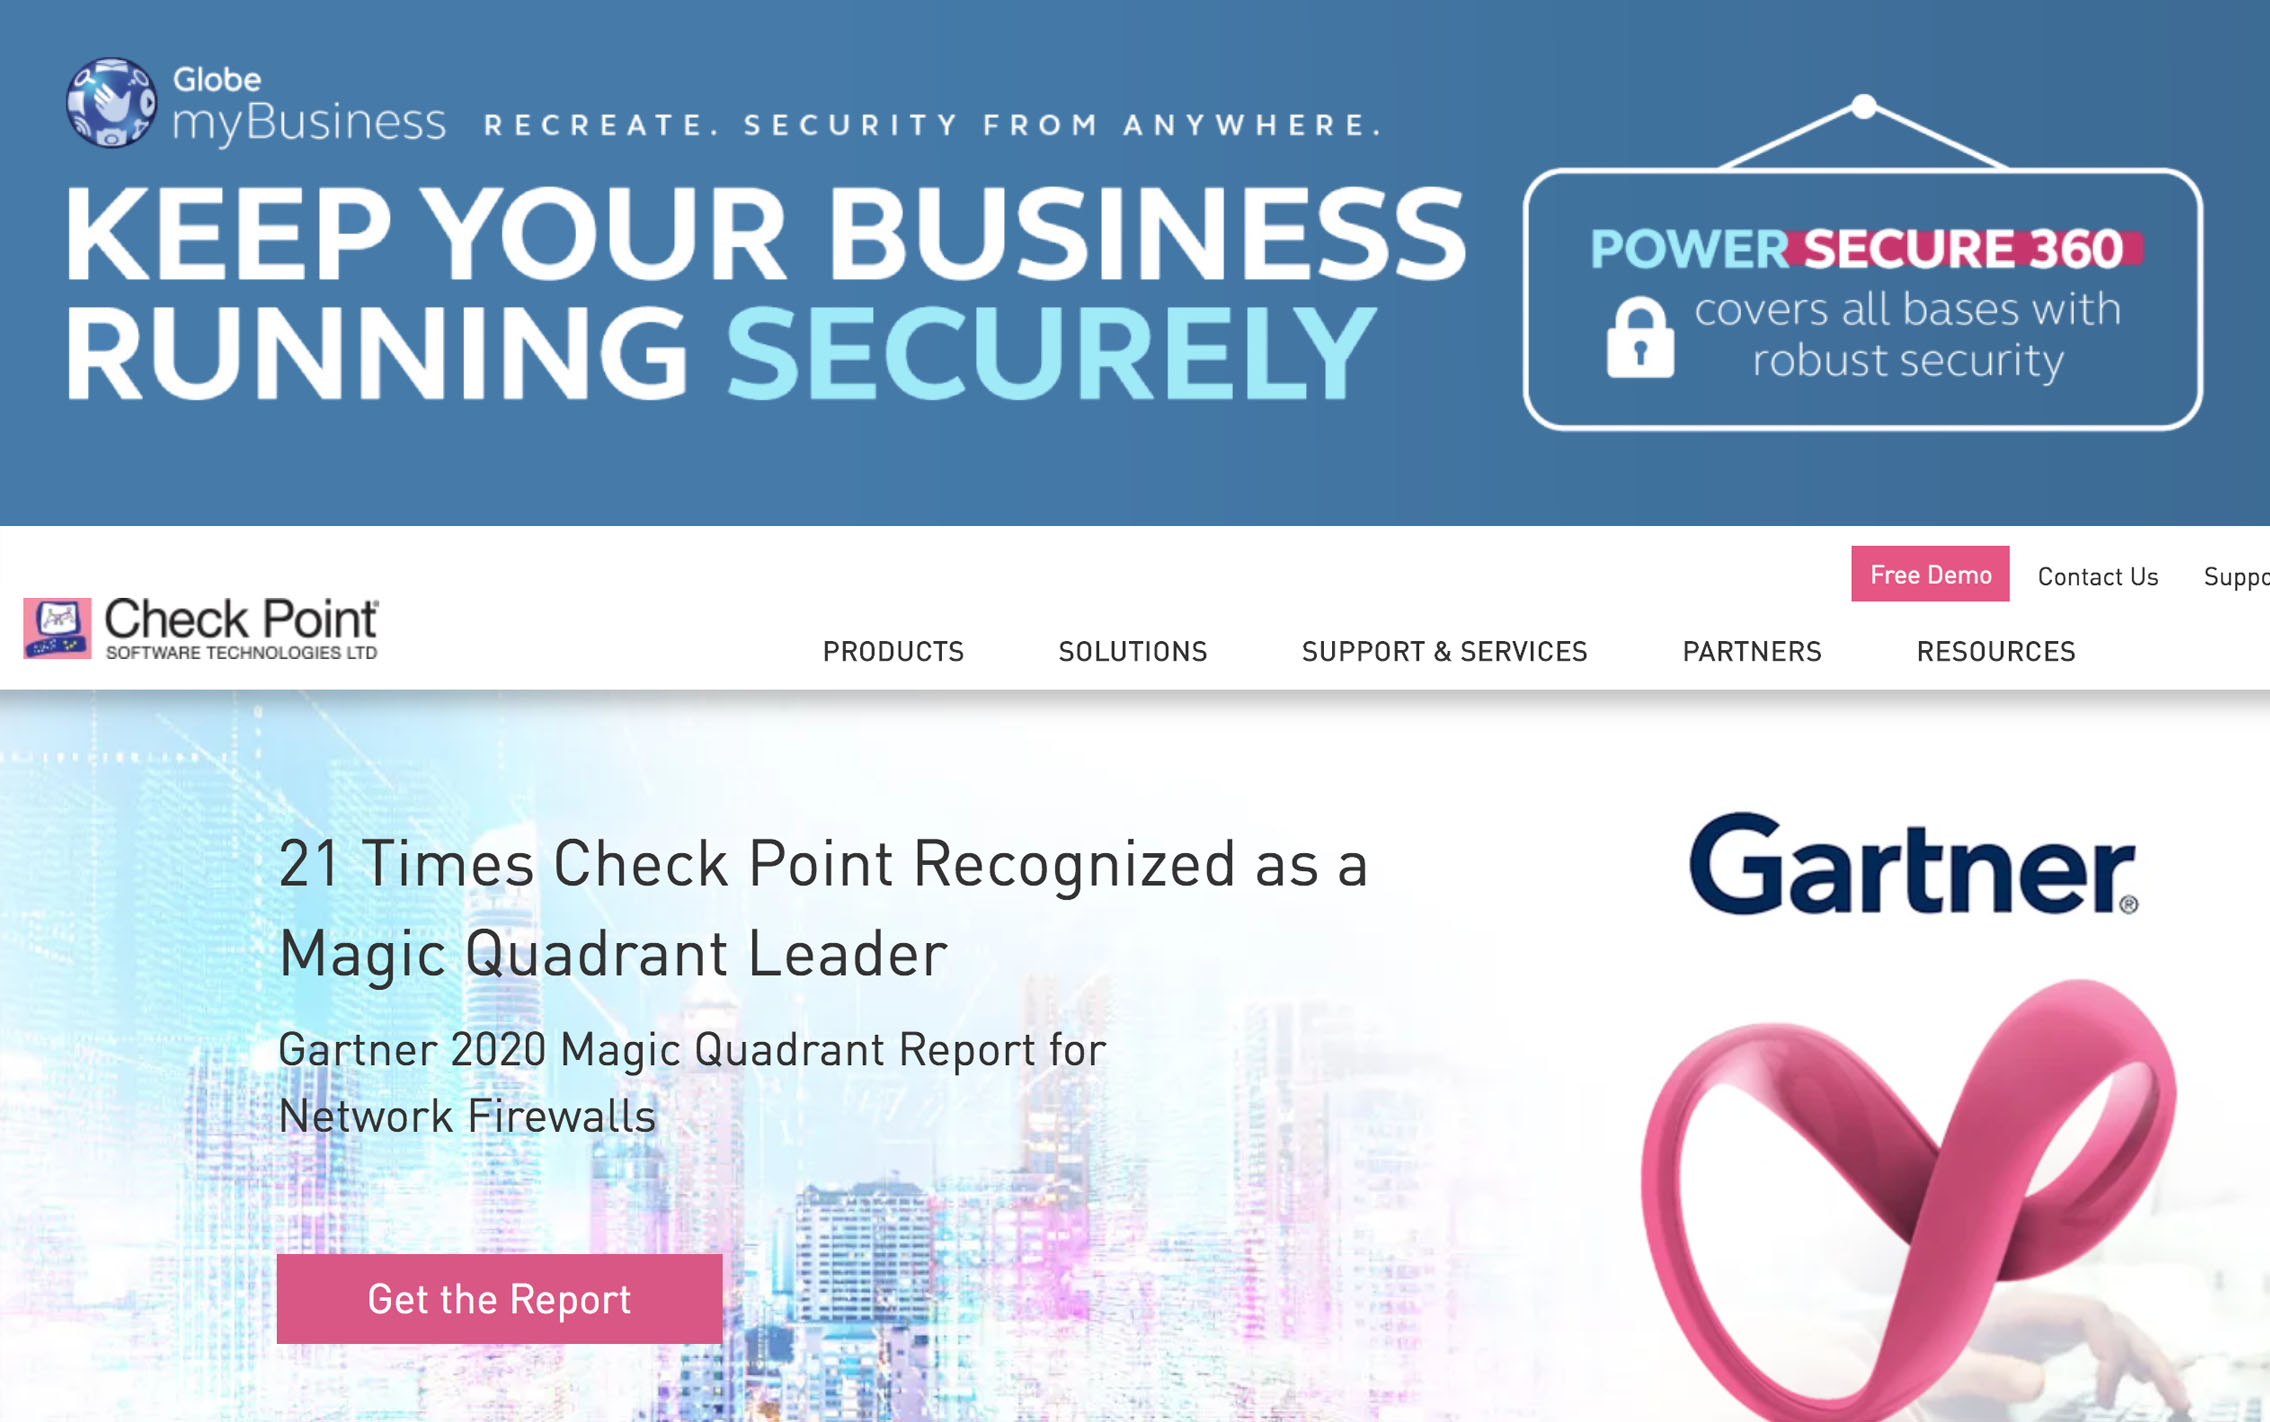 Globe myBusiness partners with Check Point to help protect your business across all devices